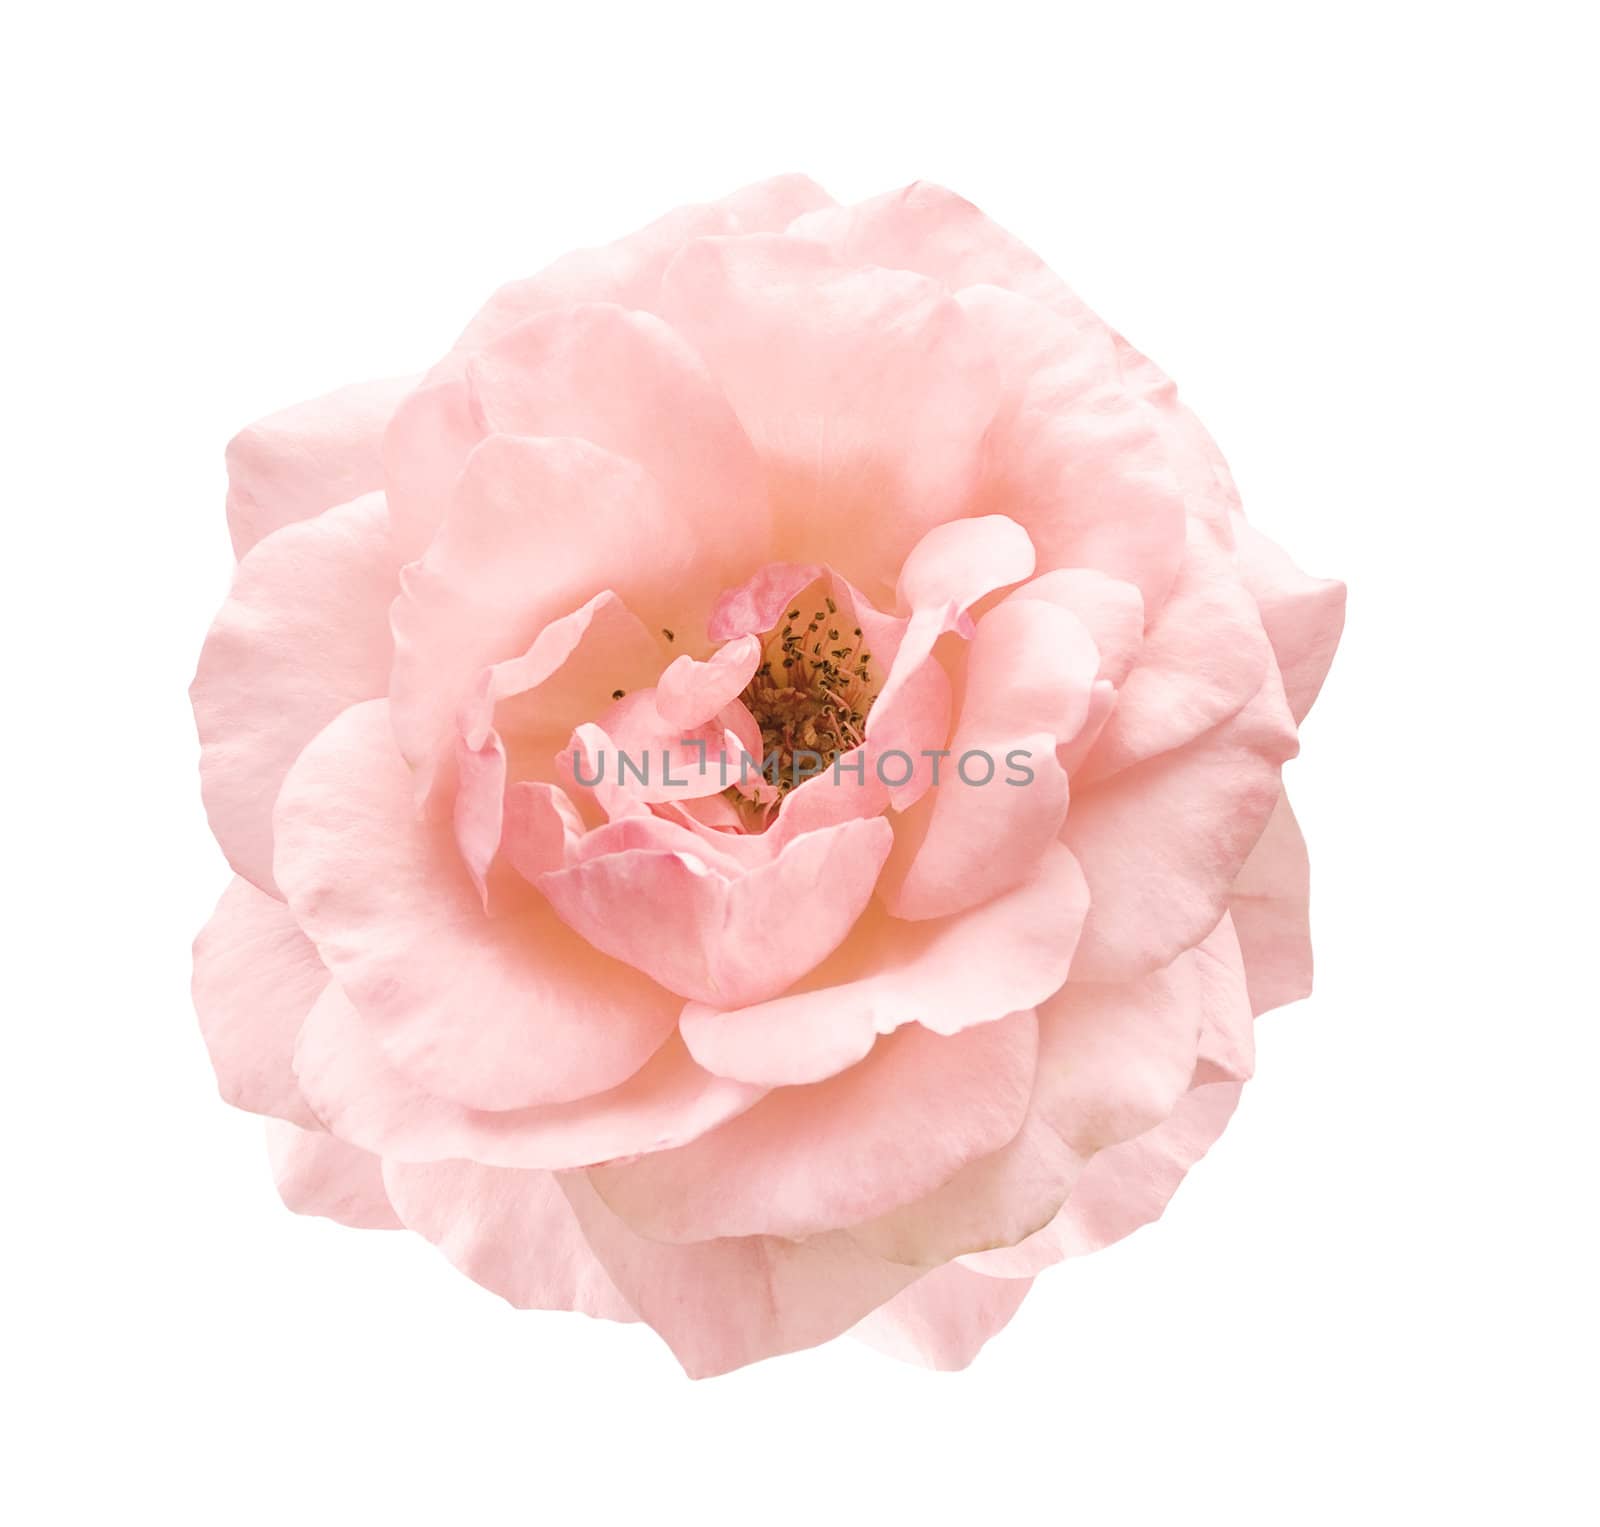 pale pink rose symbol of love and affection by sherj